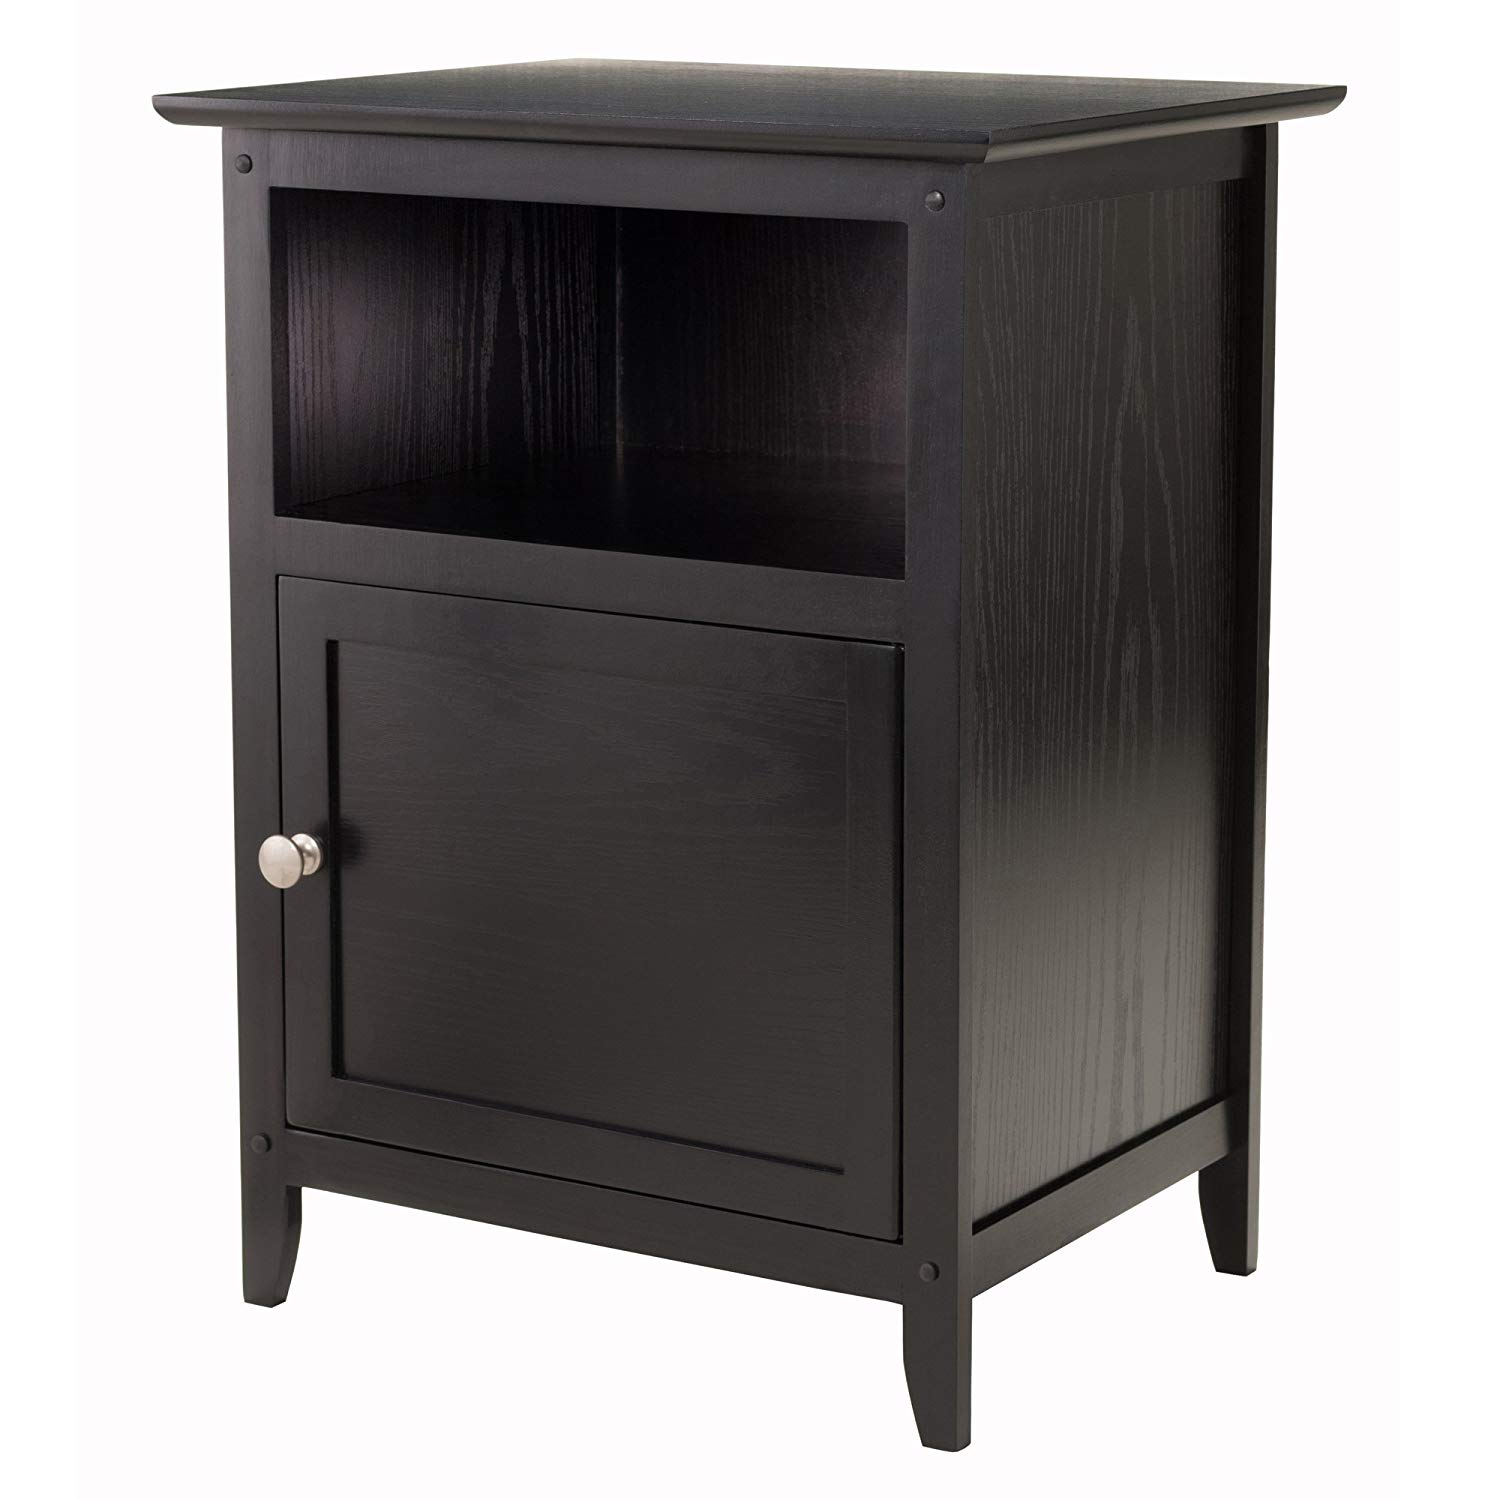 nightstands tall accent table with storage winsome wood henry black side outdoor globe light pottery barn high top mission style furniture decorative inch round covers pool chairs